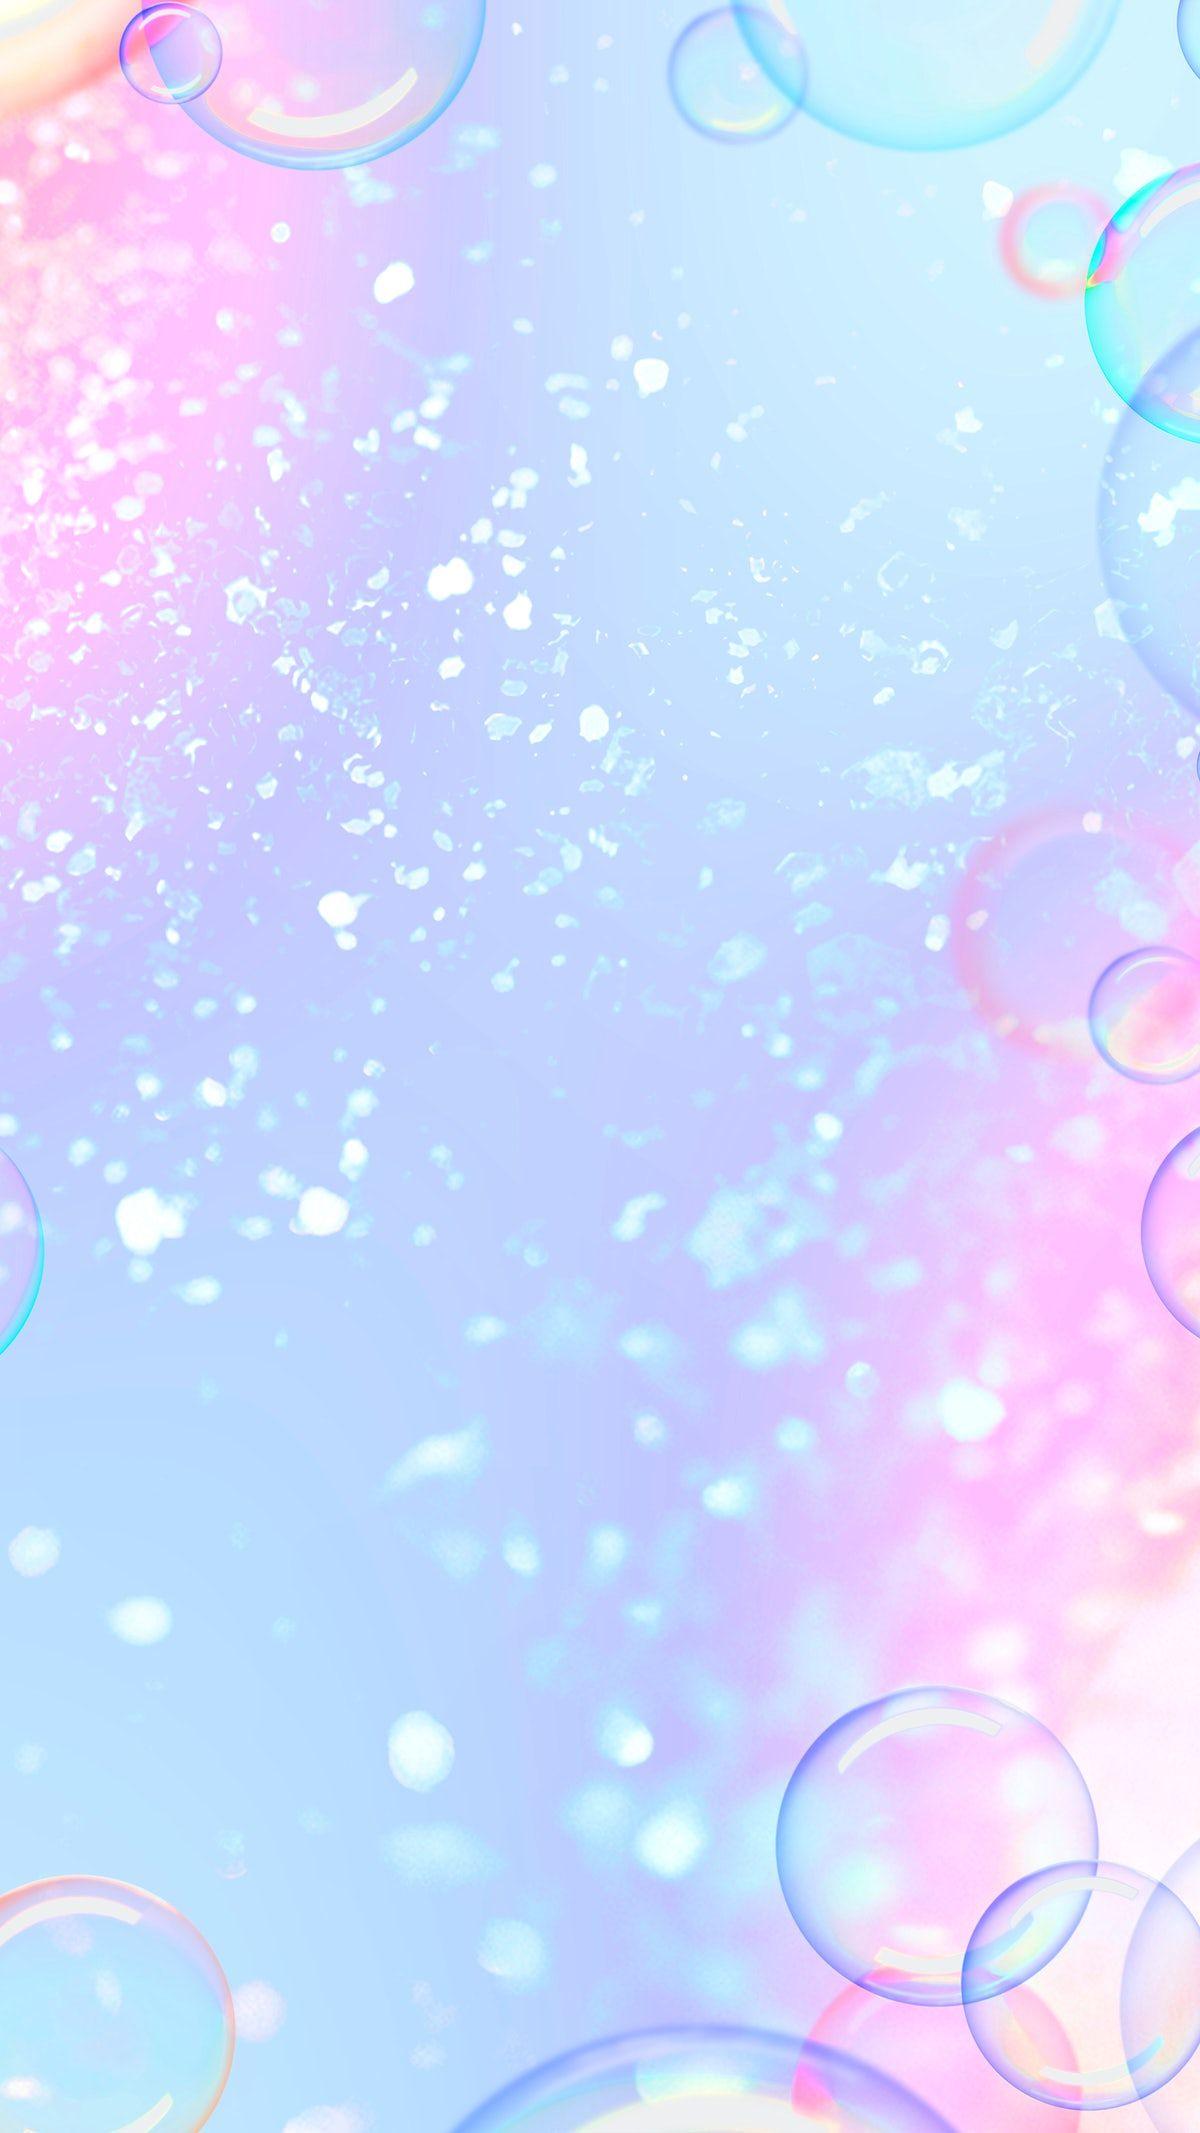 Aesthetic Bubbles Wallpapers - Top Free Aesthetic Bubbles Backgrounds ...